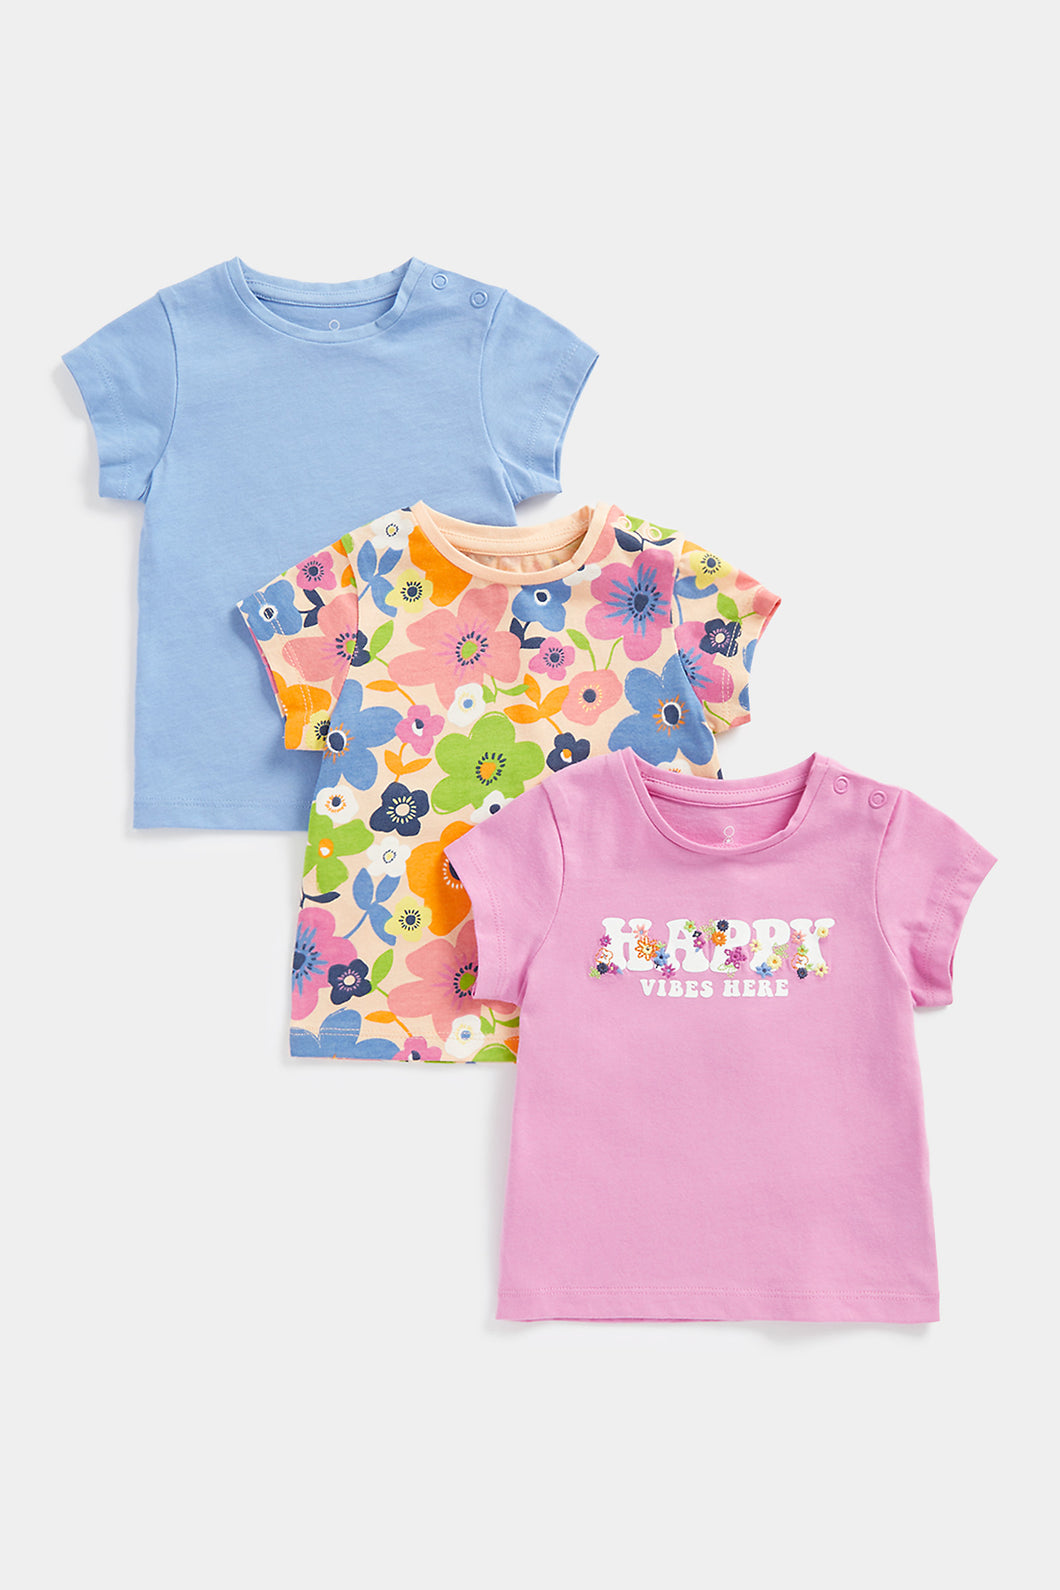 Mothercare Happy Vibes T-Shirts - 3 Pack